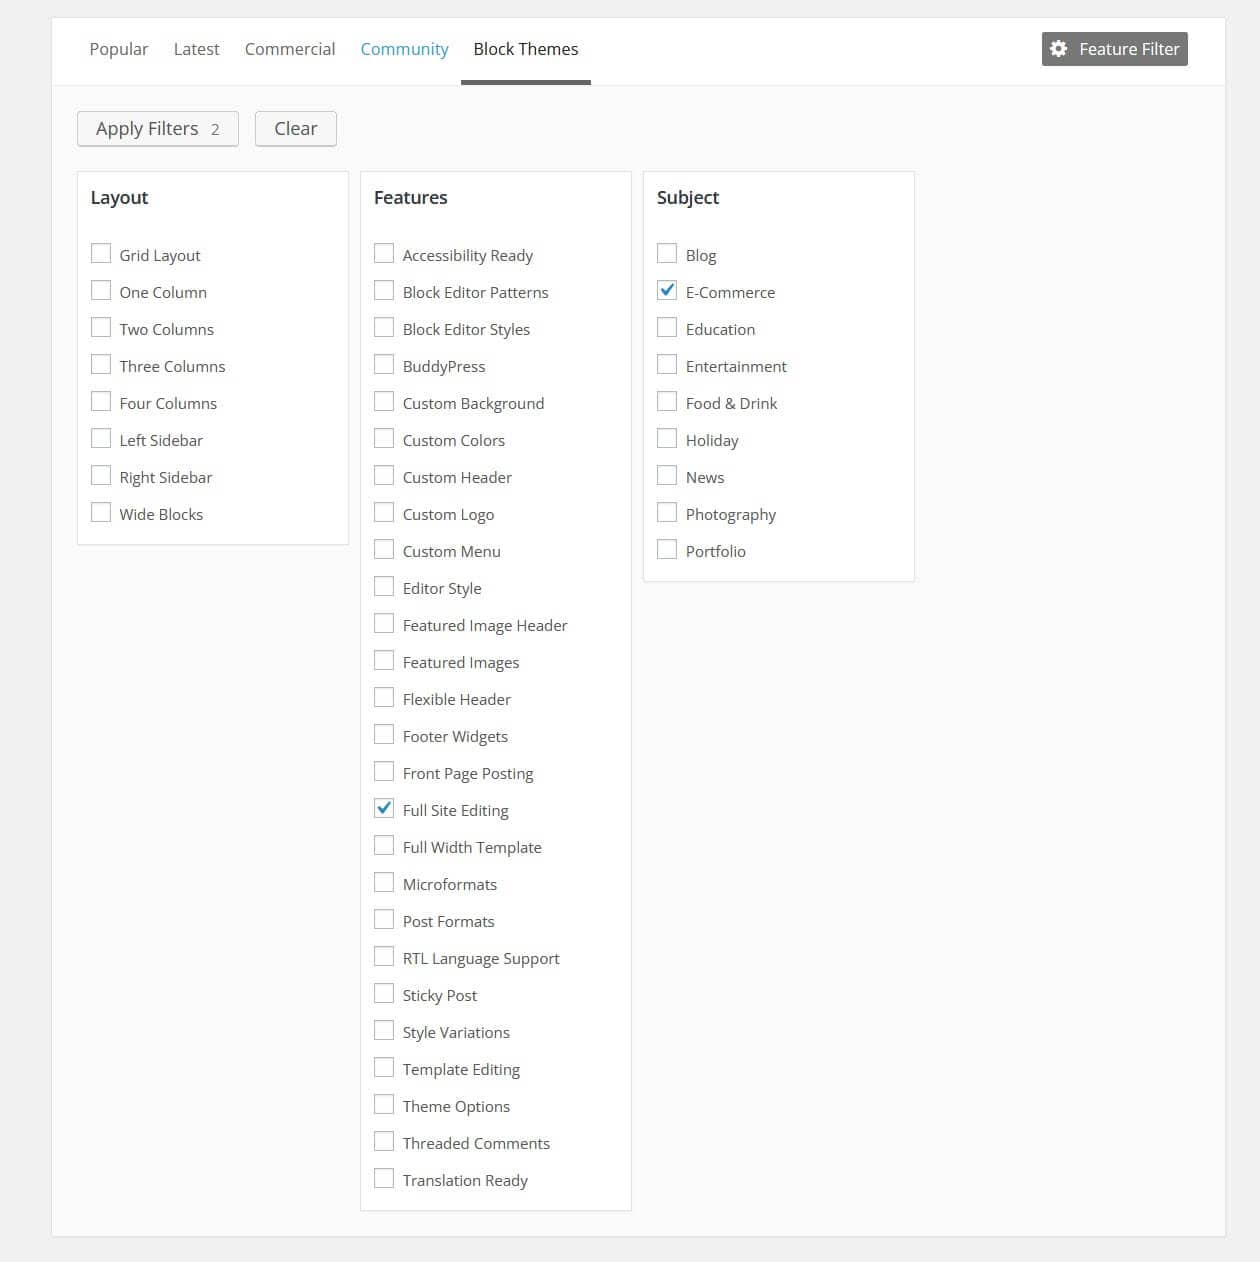 Filtering block themes by subject Ecommerce.